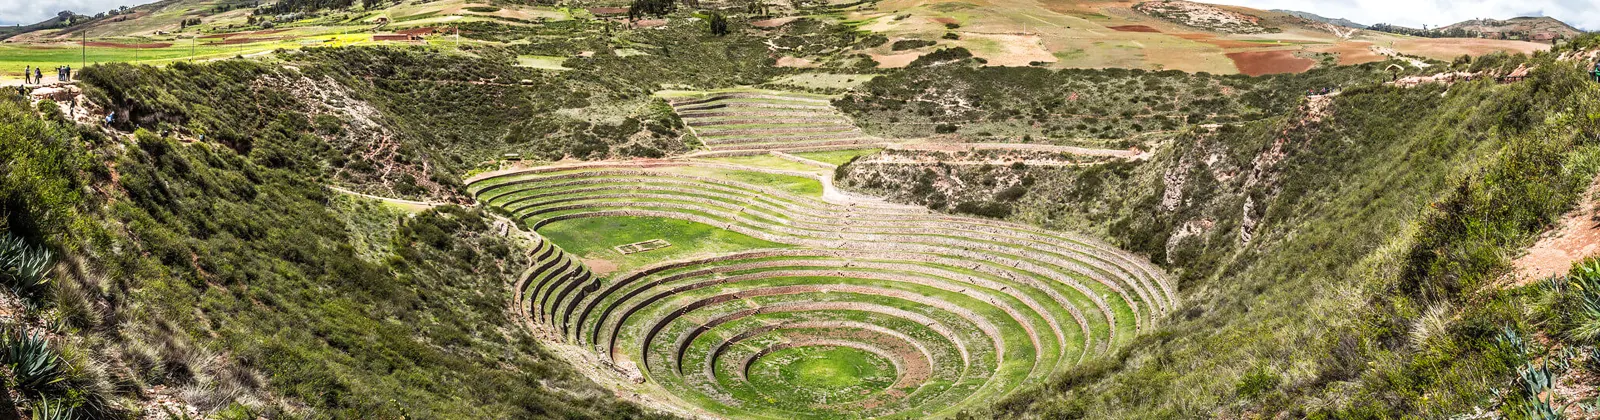 MORAY TOUR AND SALINERAS / HALF DAY (5 HOURS): <strong>Visit Salineras, Moray, and the local weaving  center at Chinchero</strong>